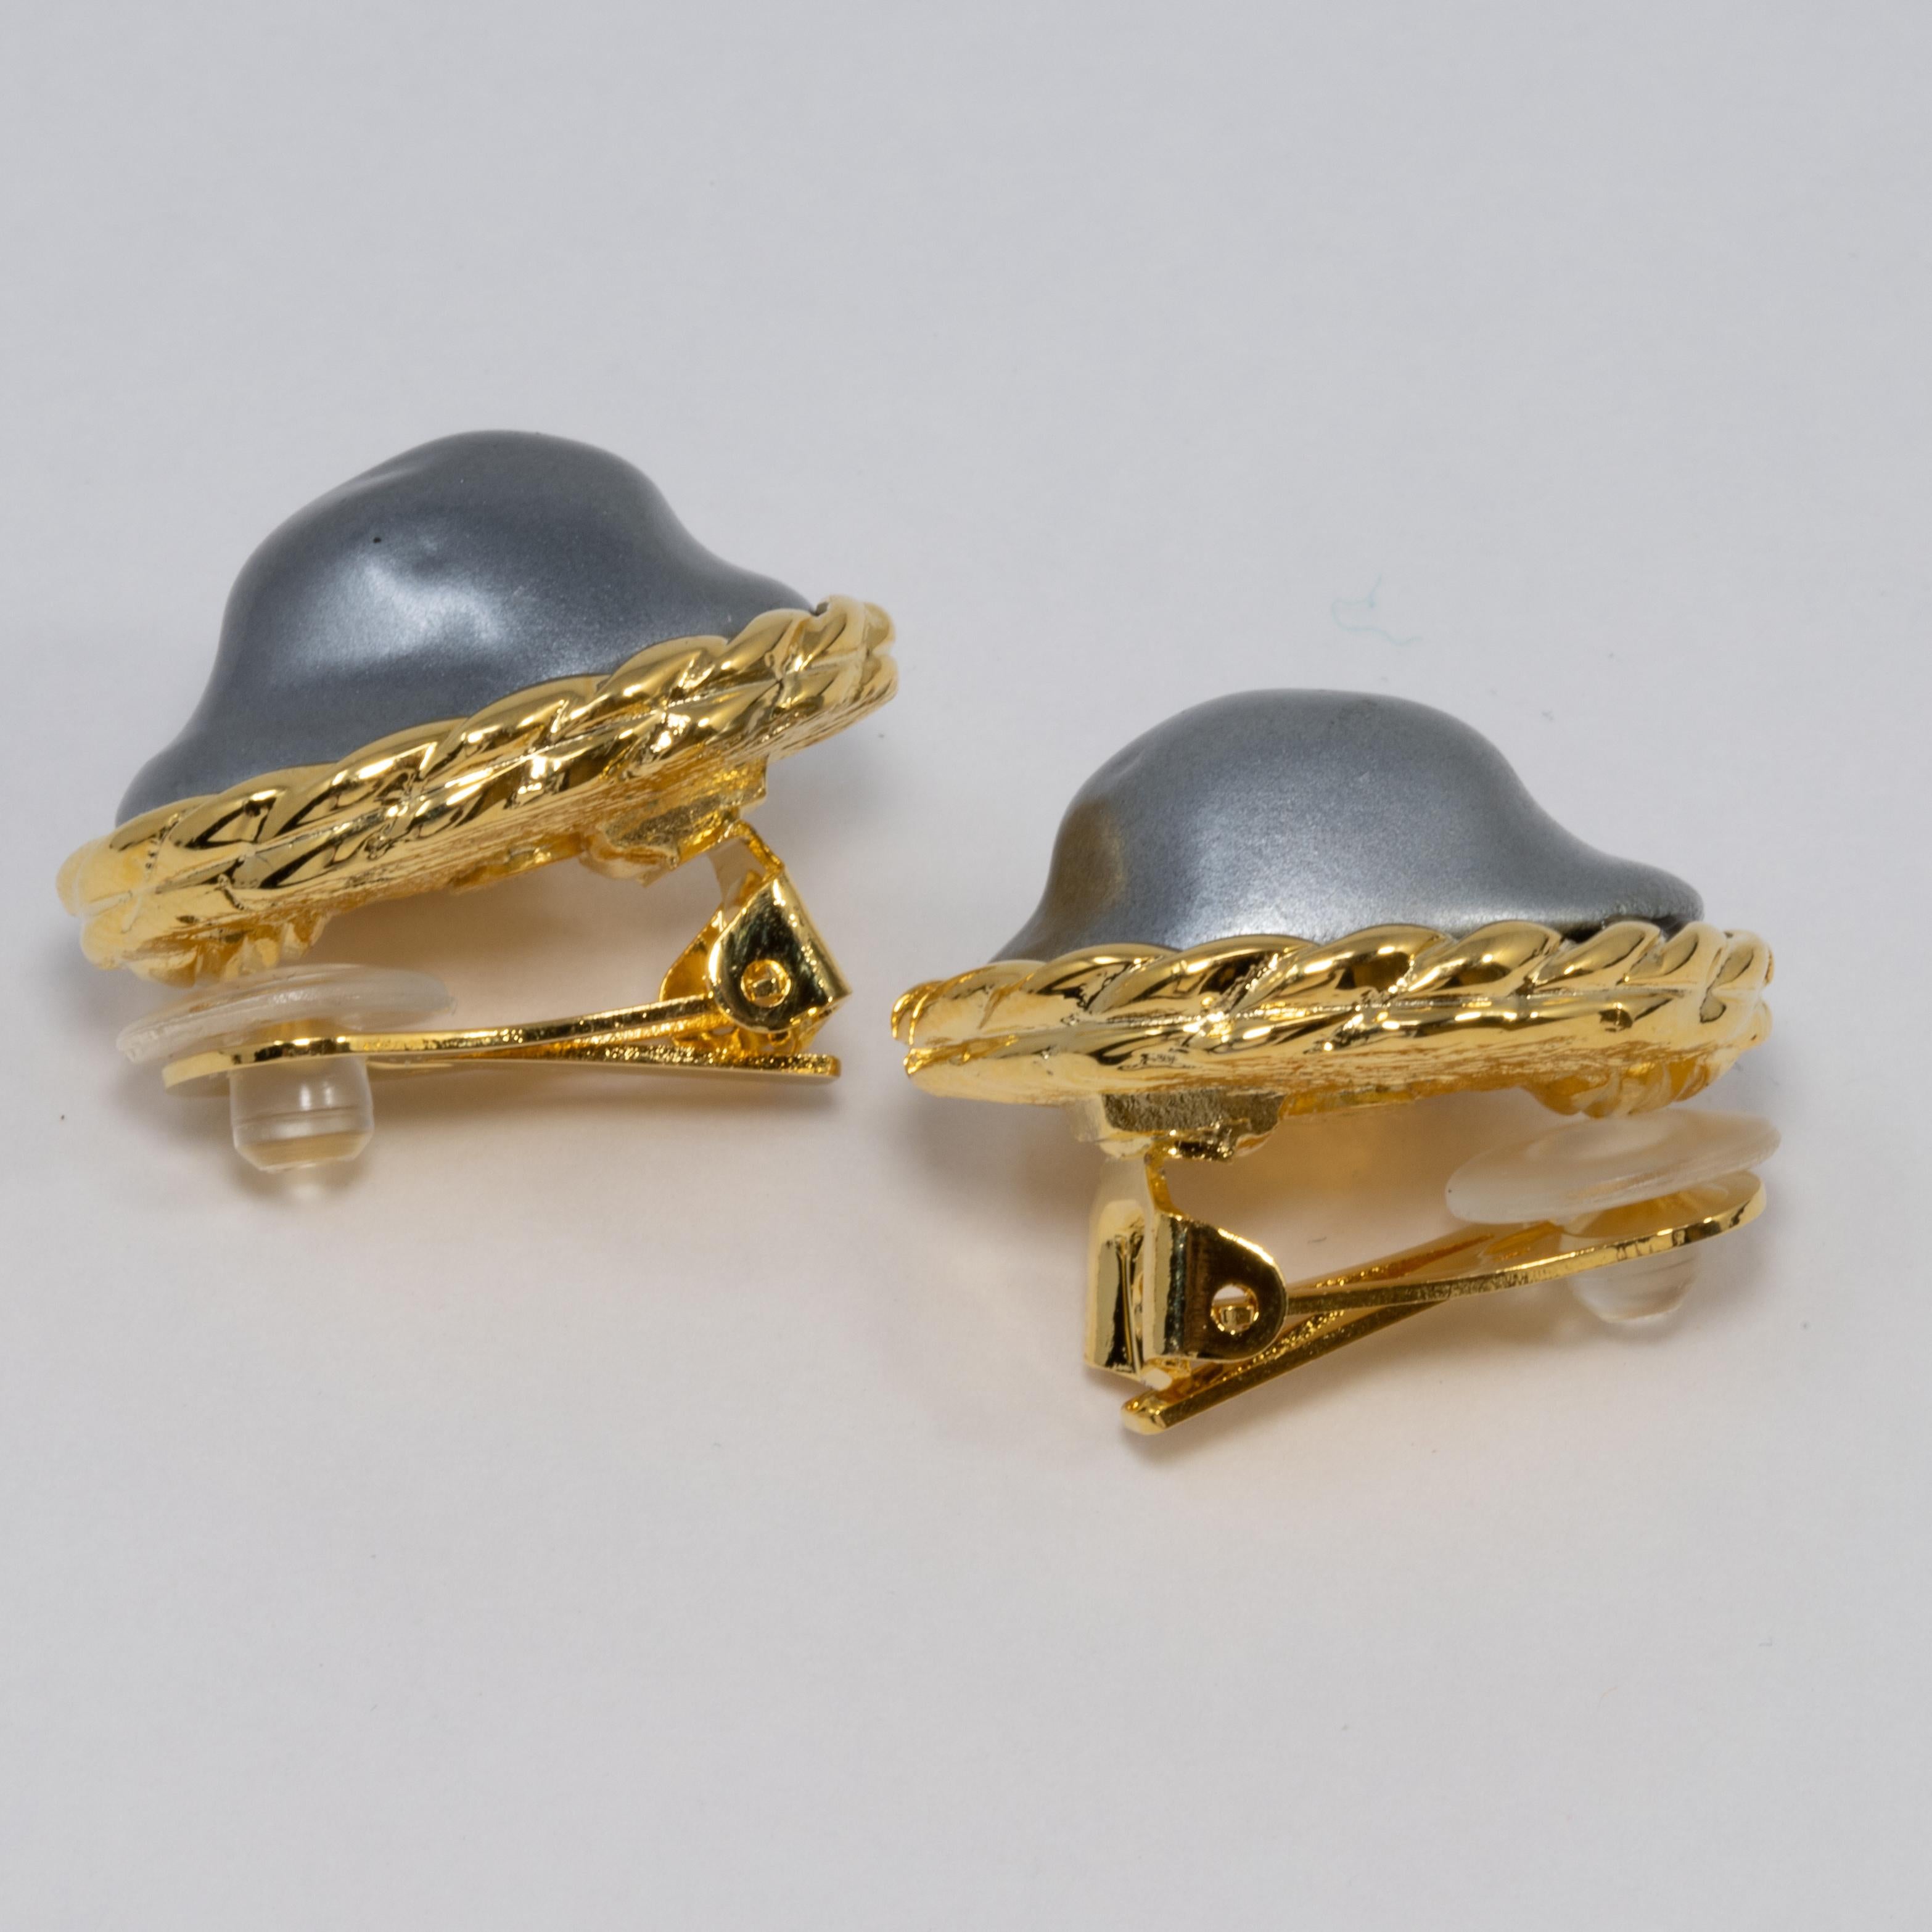 Earrings by Kenneth Jay Lane. Grey resin mother of pearl centers set in decorative gold-plated bezel. Clip ons.

Hallmarks: Kenneth Lane, Made in USA